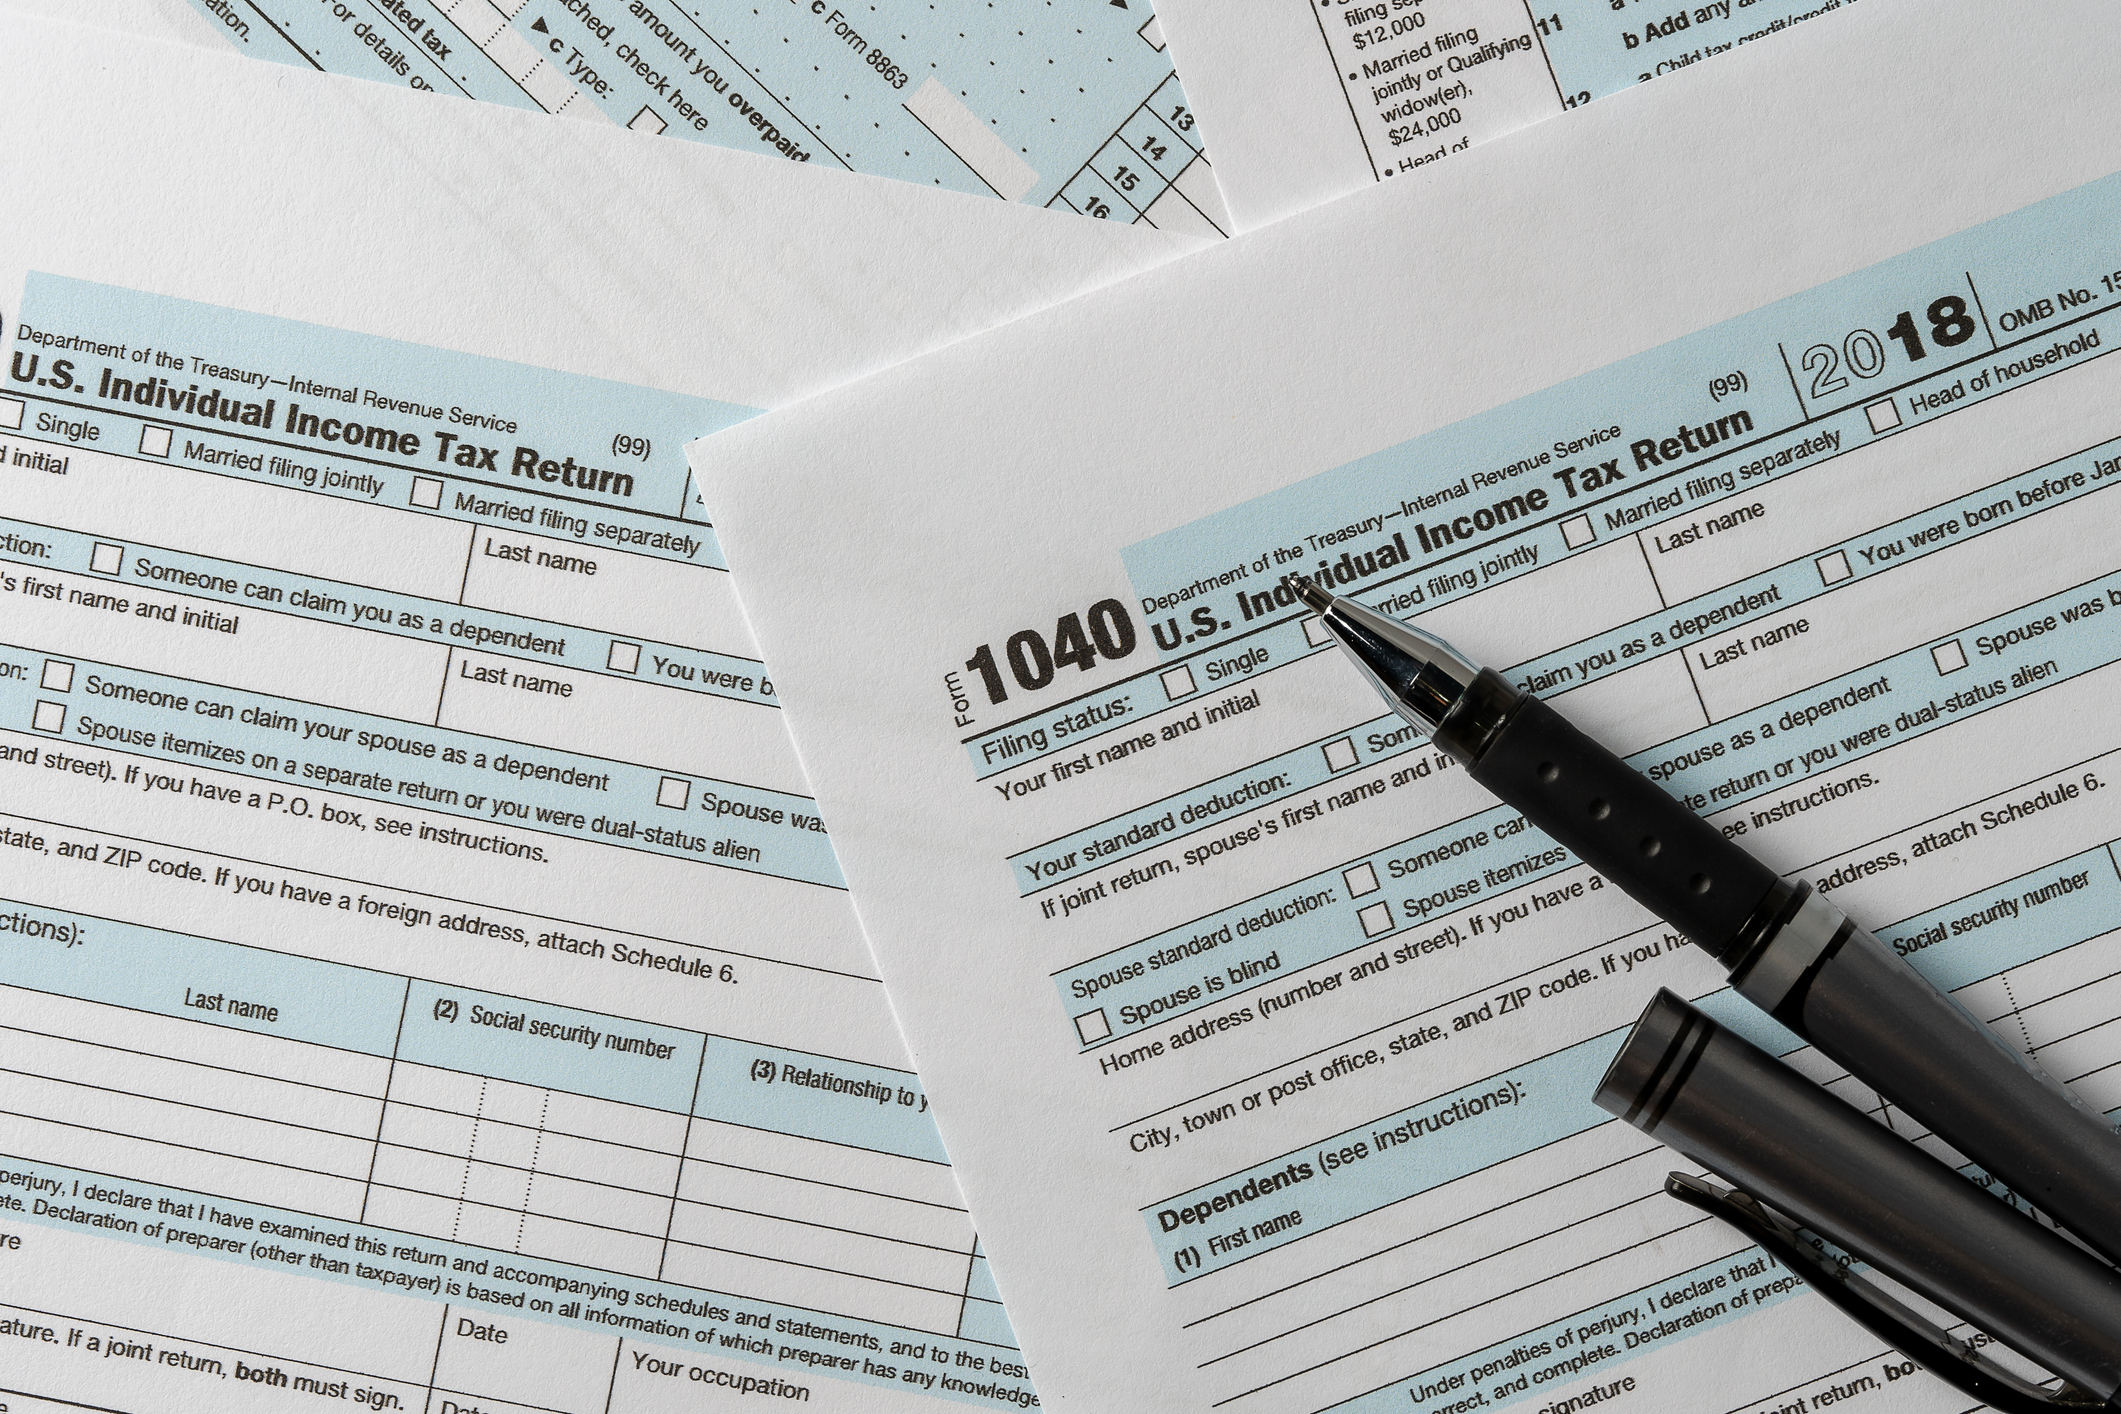 5 Misconceptions About Tax Refunds According to the IRS